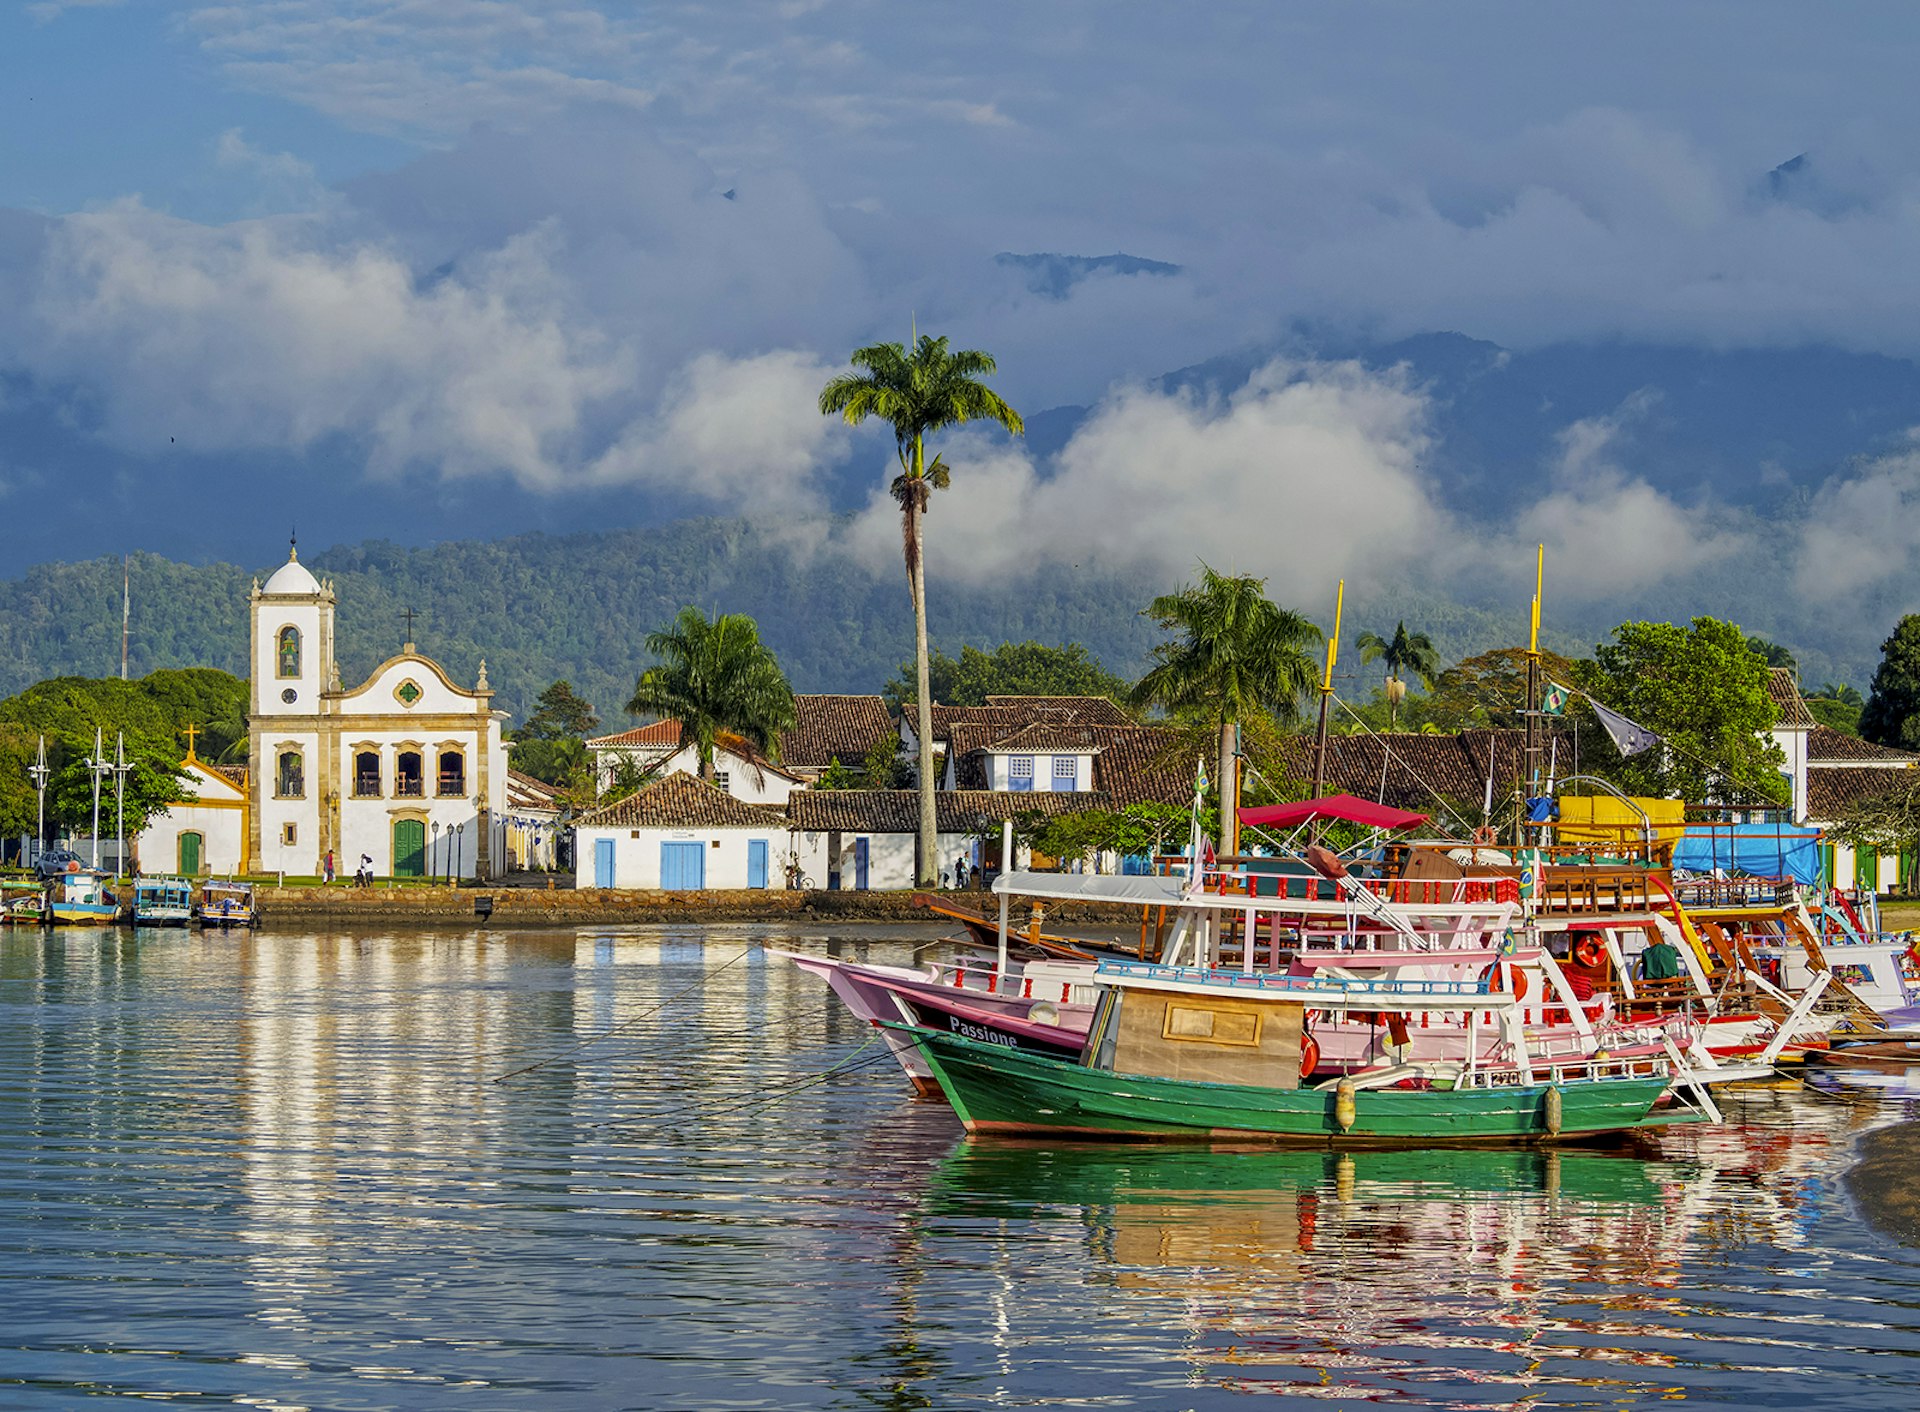 A boat passes by Paraty